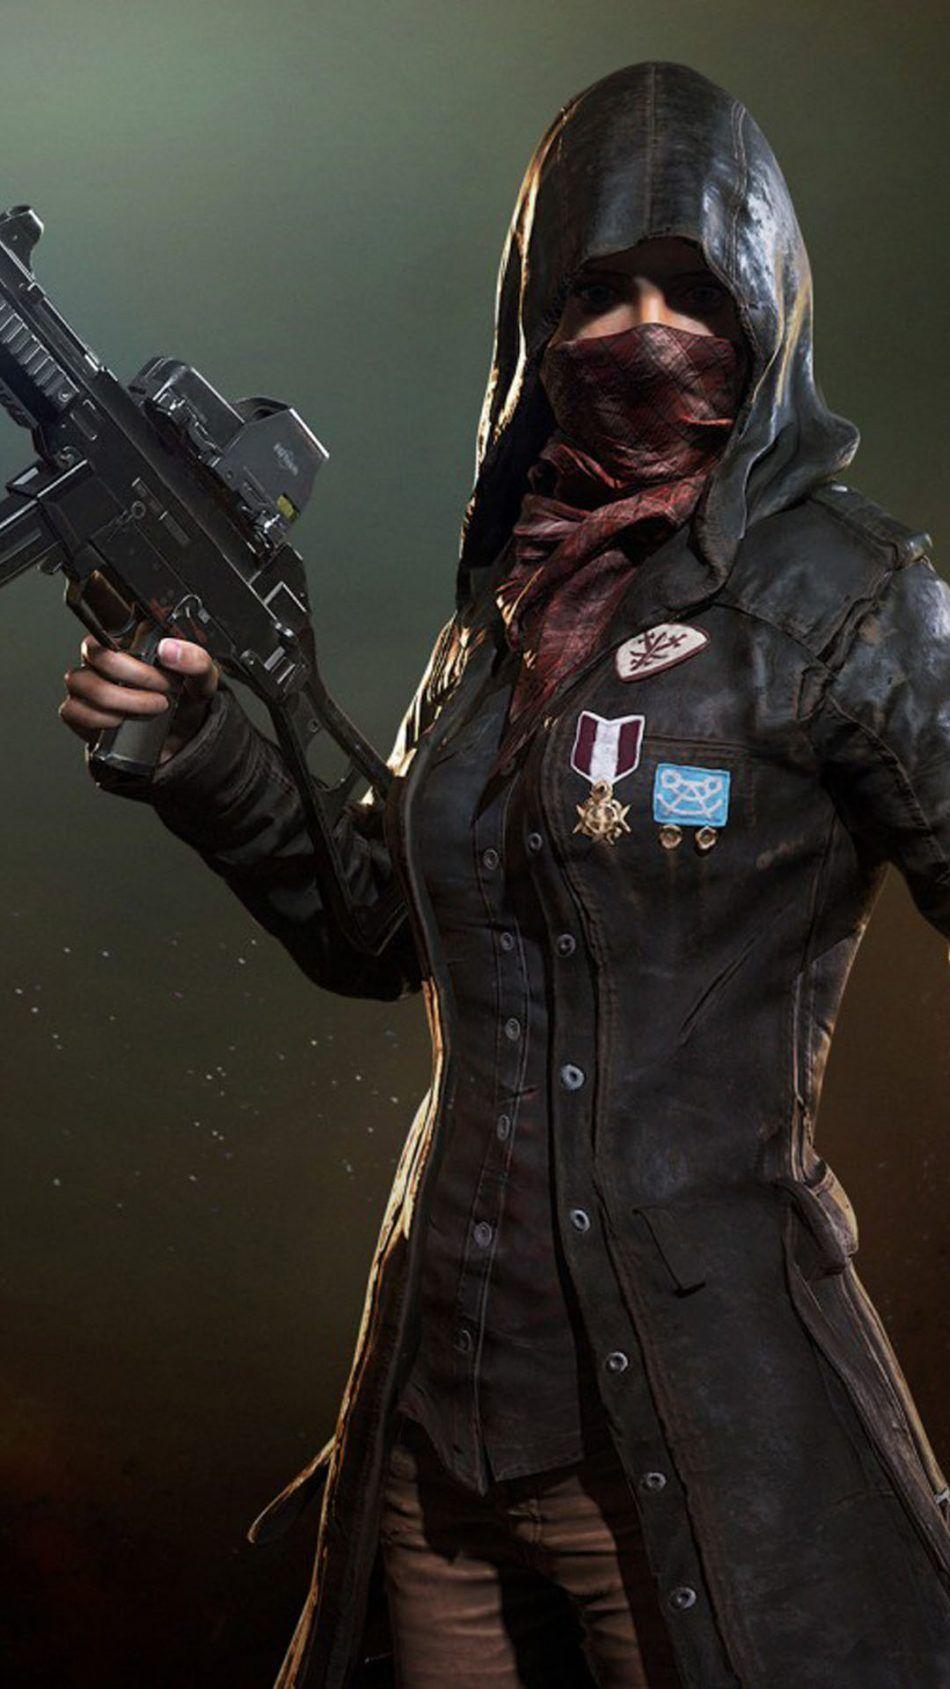 PUBG Female Player In Mask. Blue wallpaper iphone, Game wallpaper